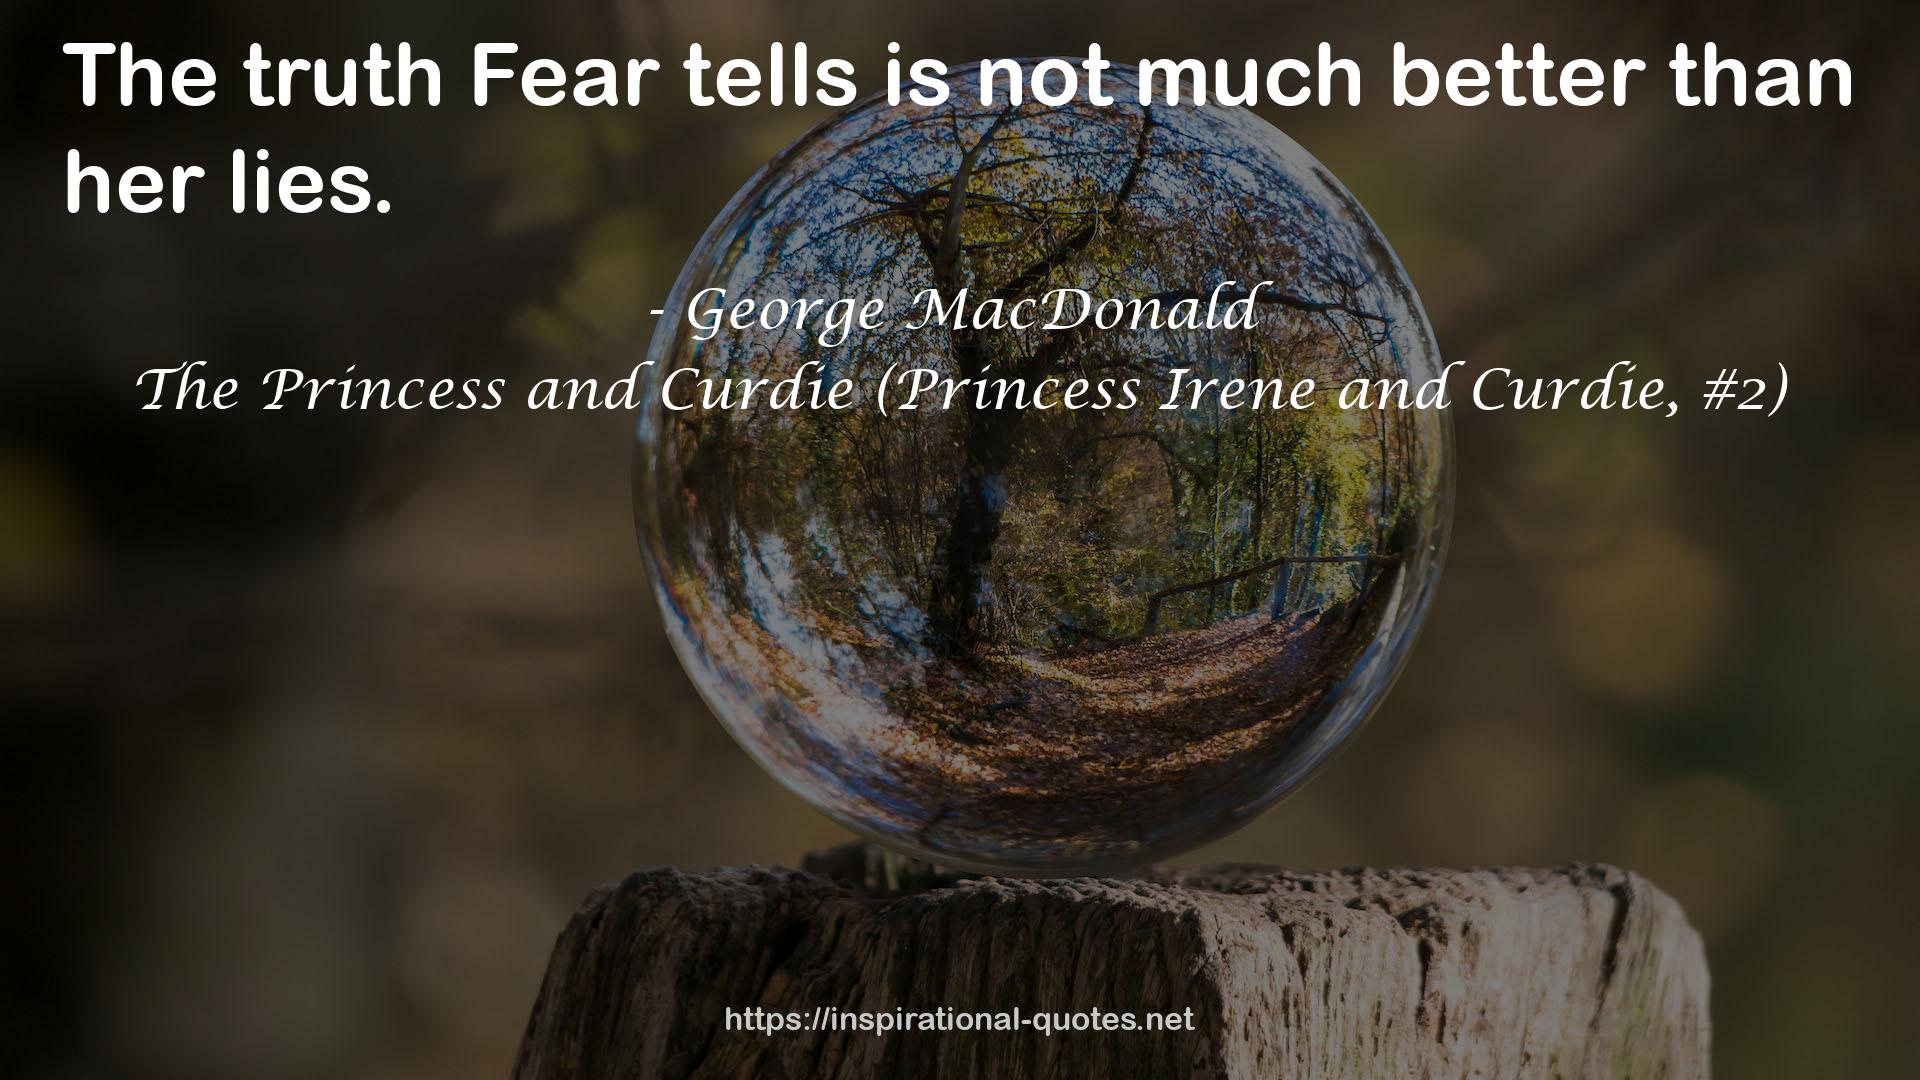 The Princess and Curdie (Princess Irene and Curdie, #2) QUOTES